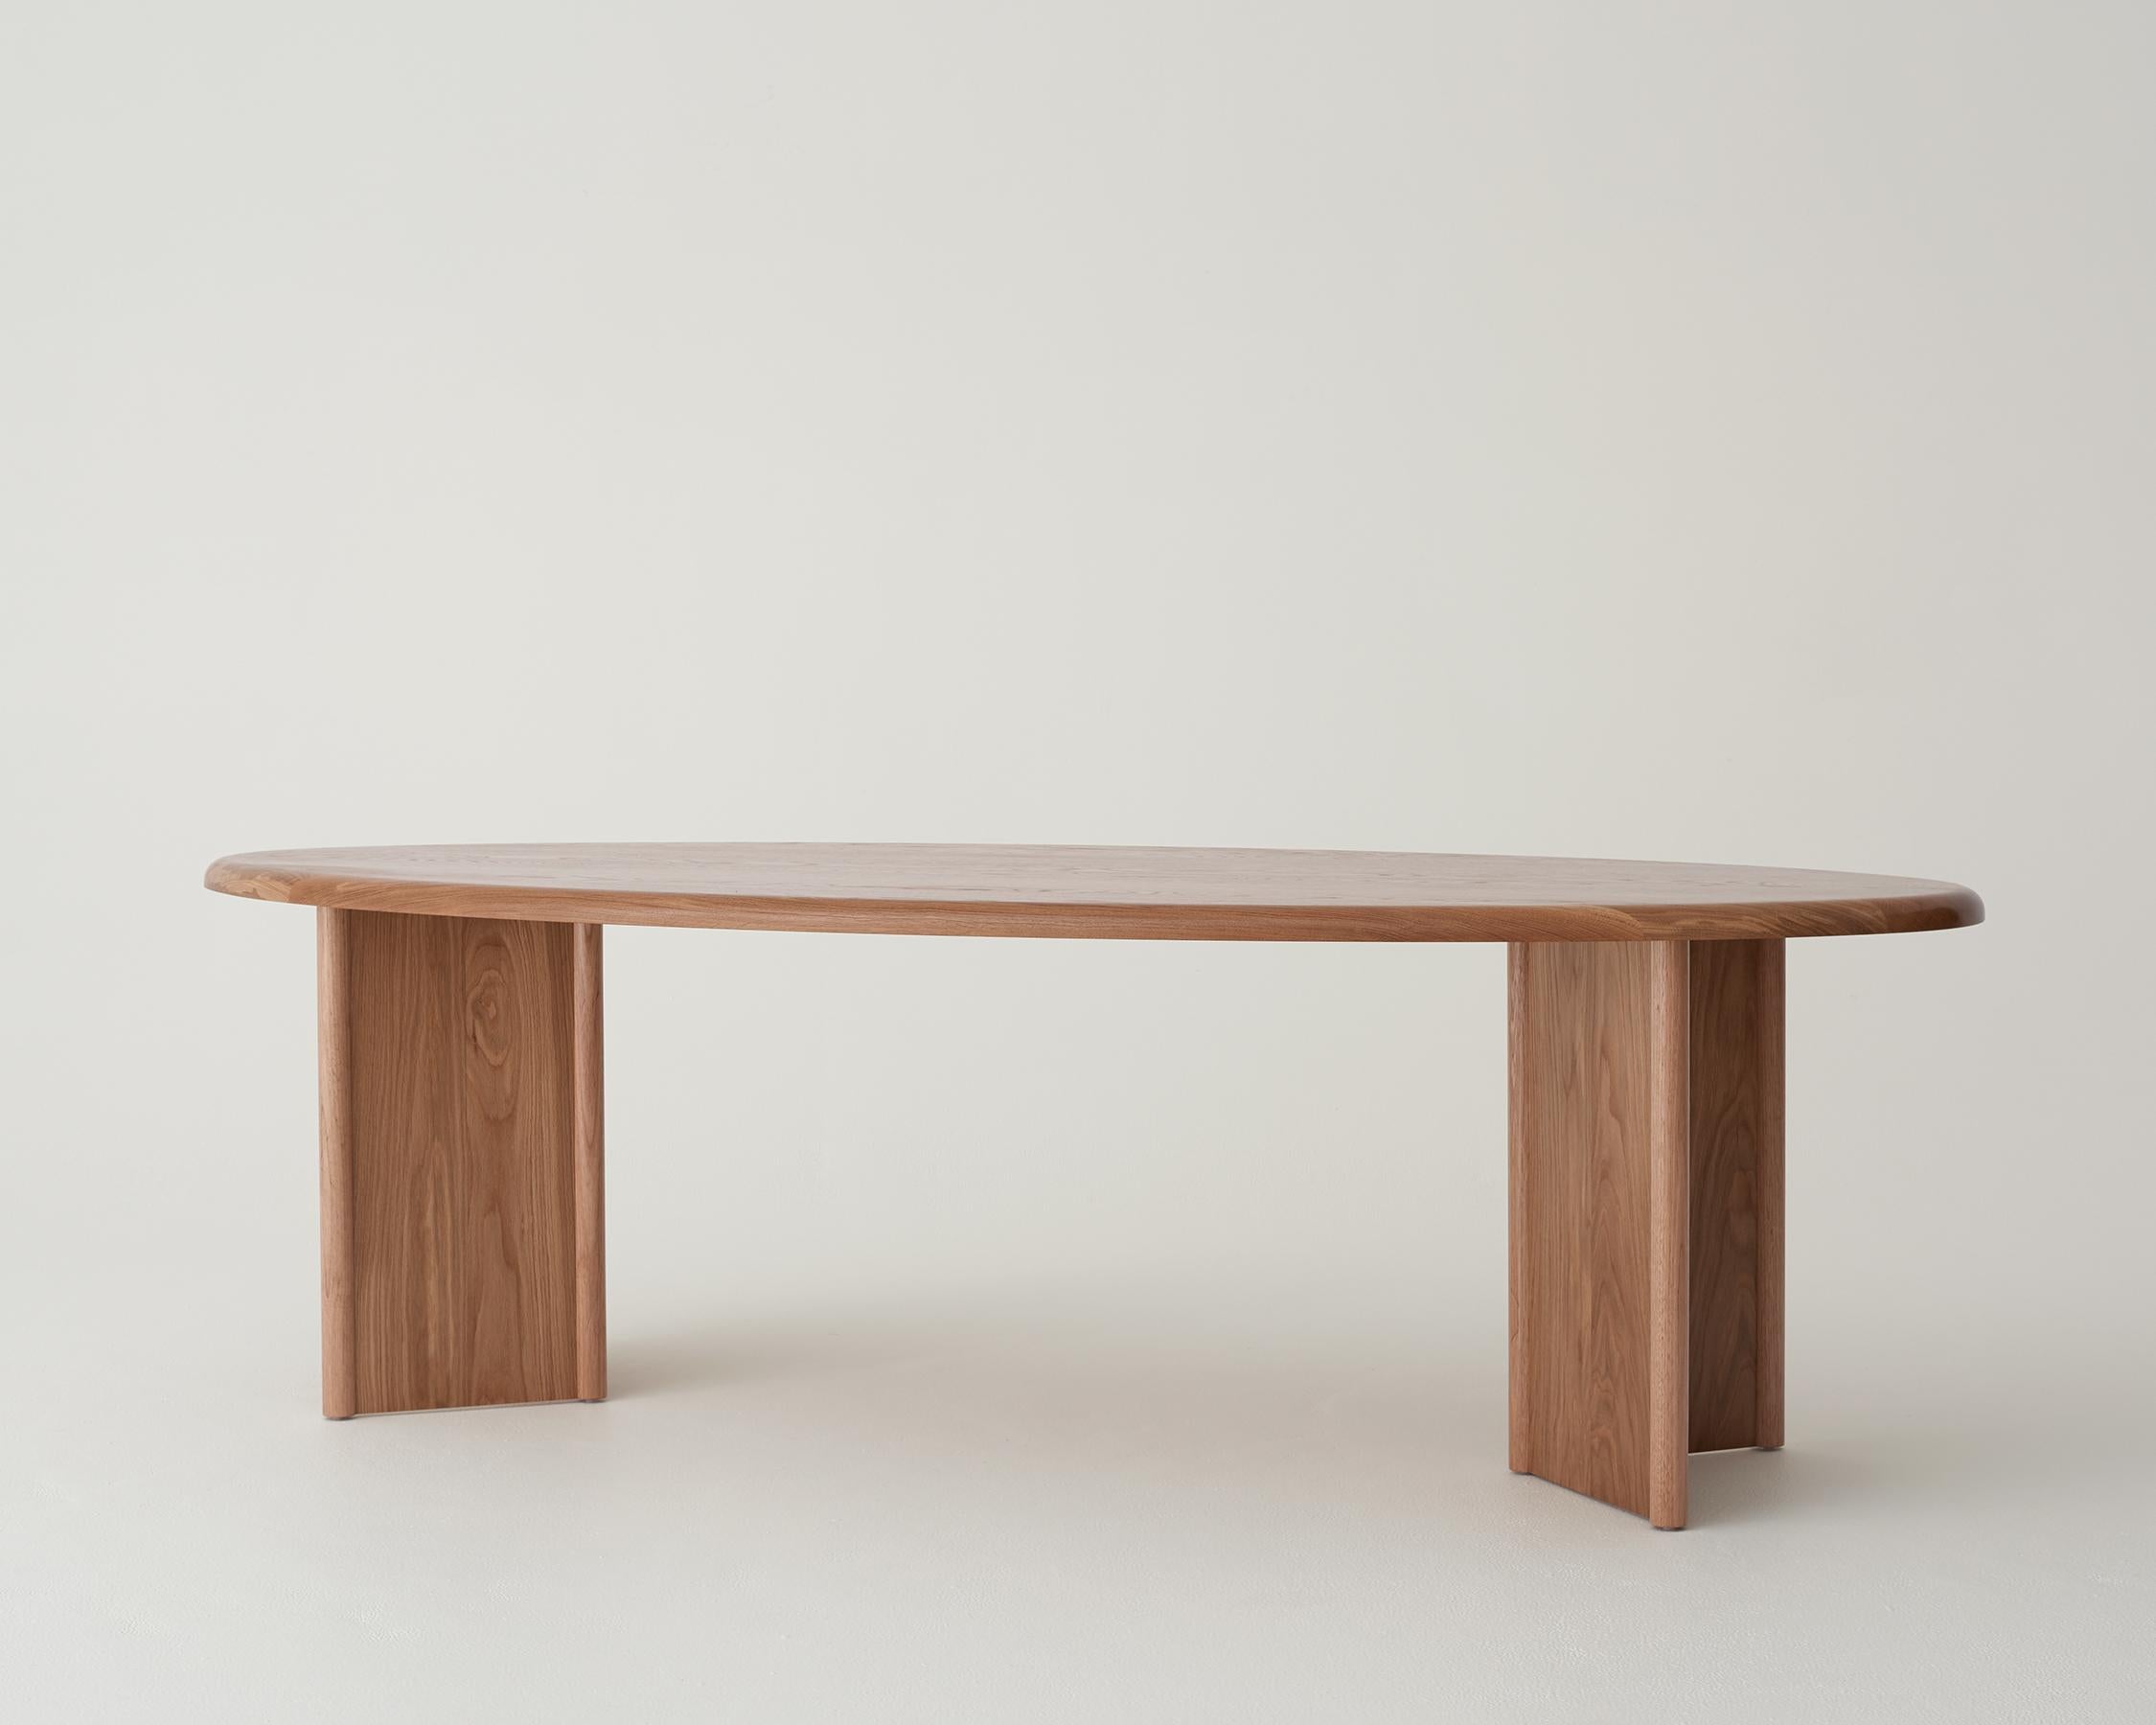 Malibu Dining Table by Daniel Boddam, Natural Oak In New Condition For Sale In Sydney, NSW